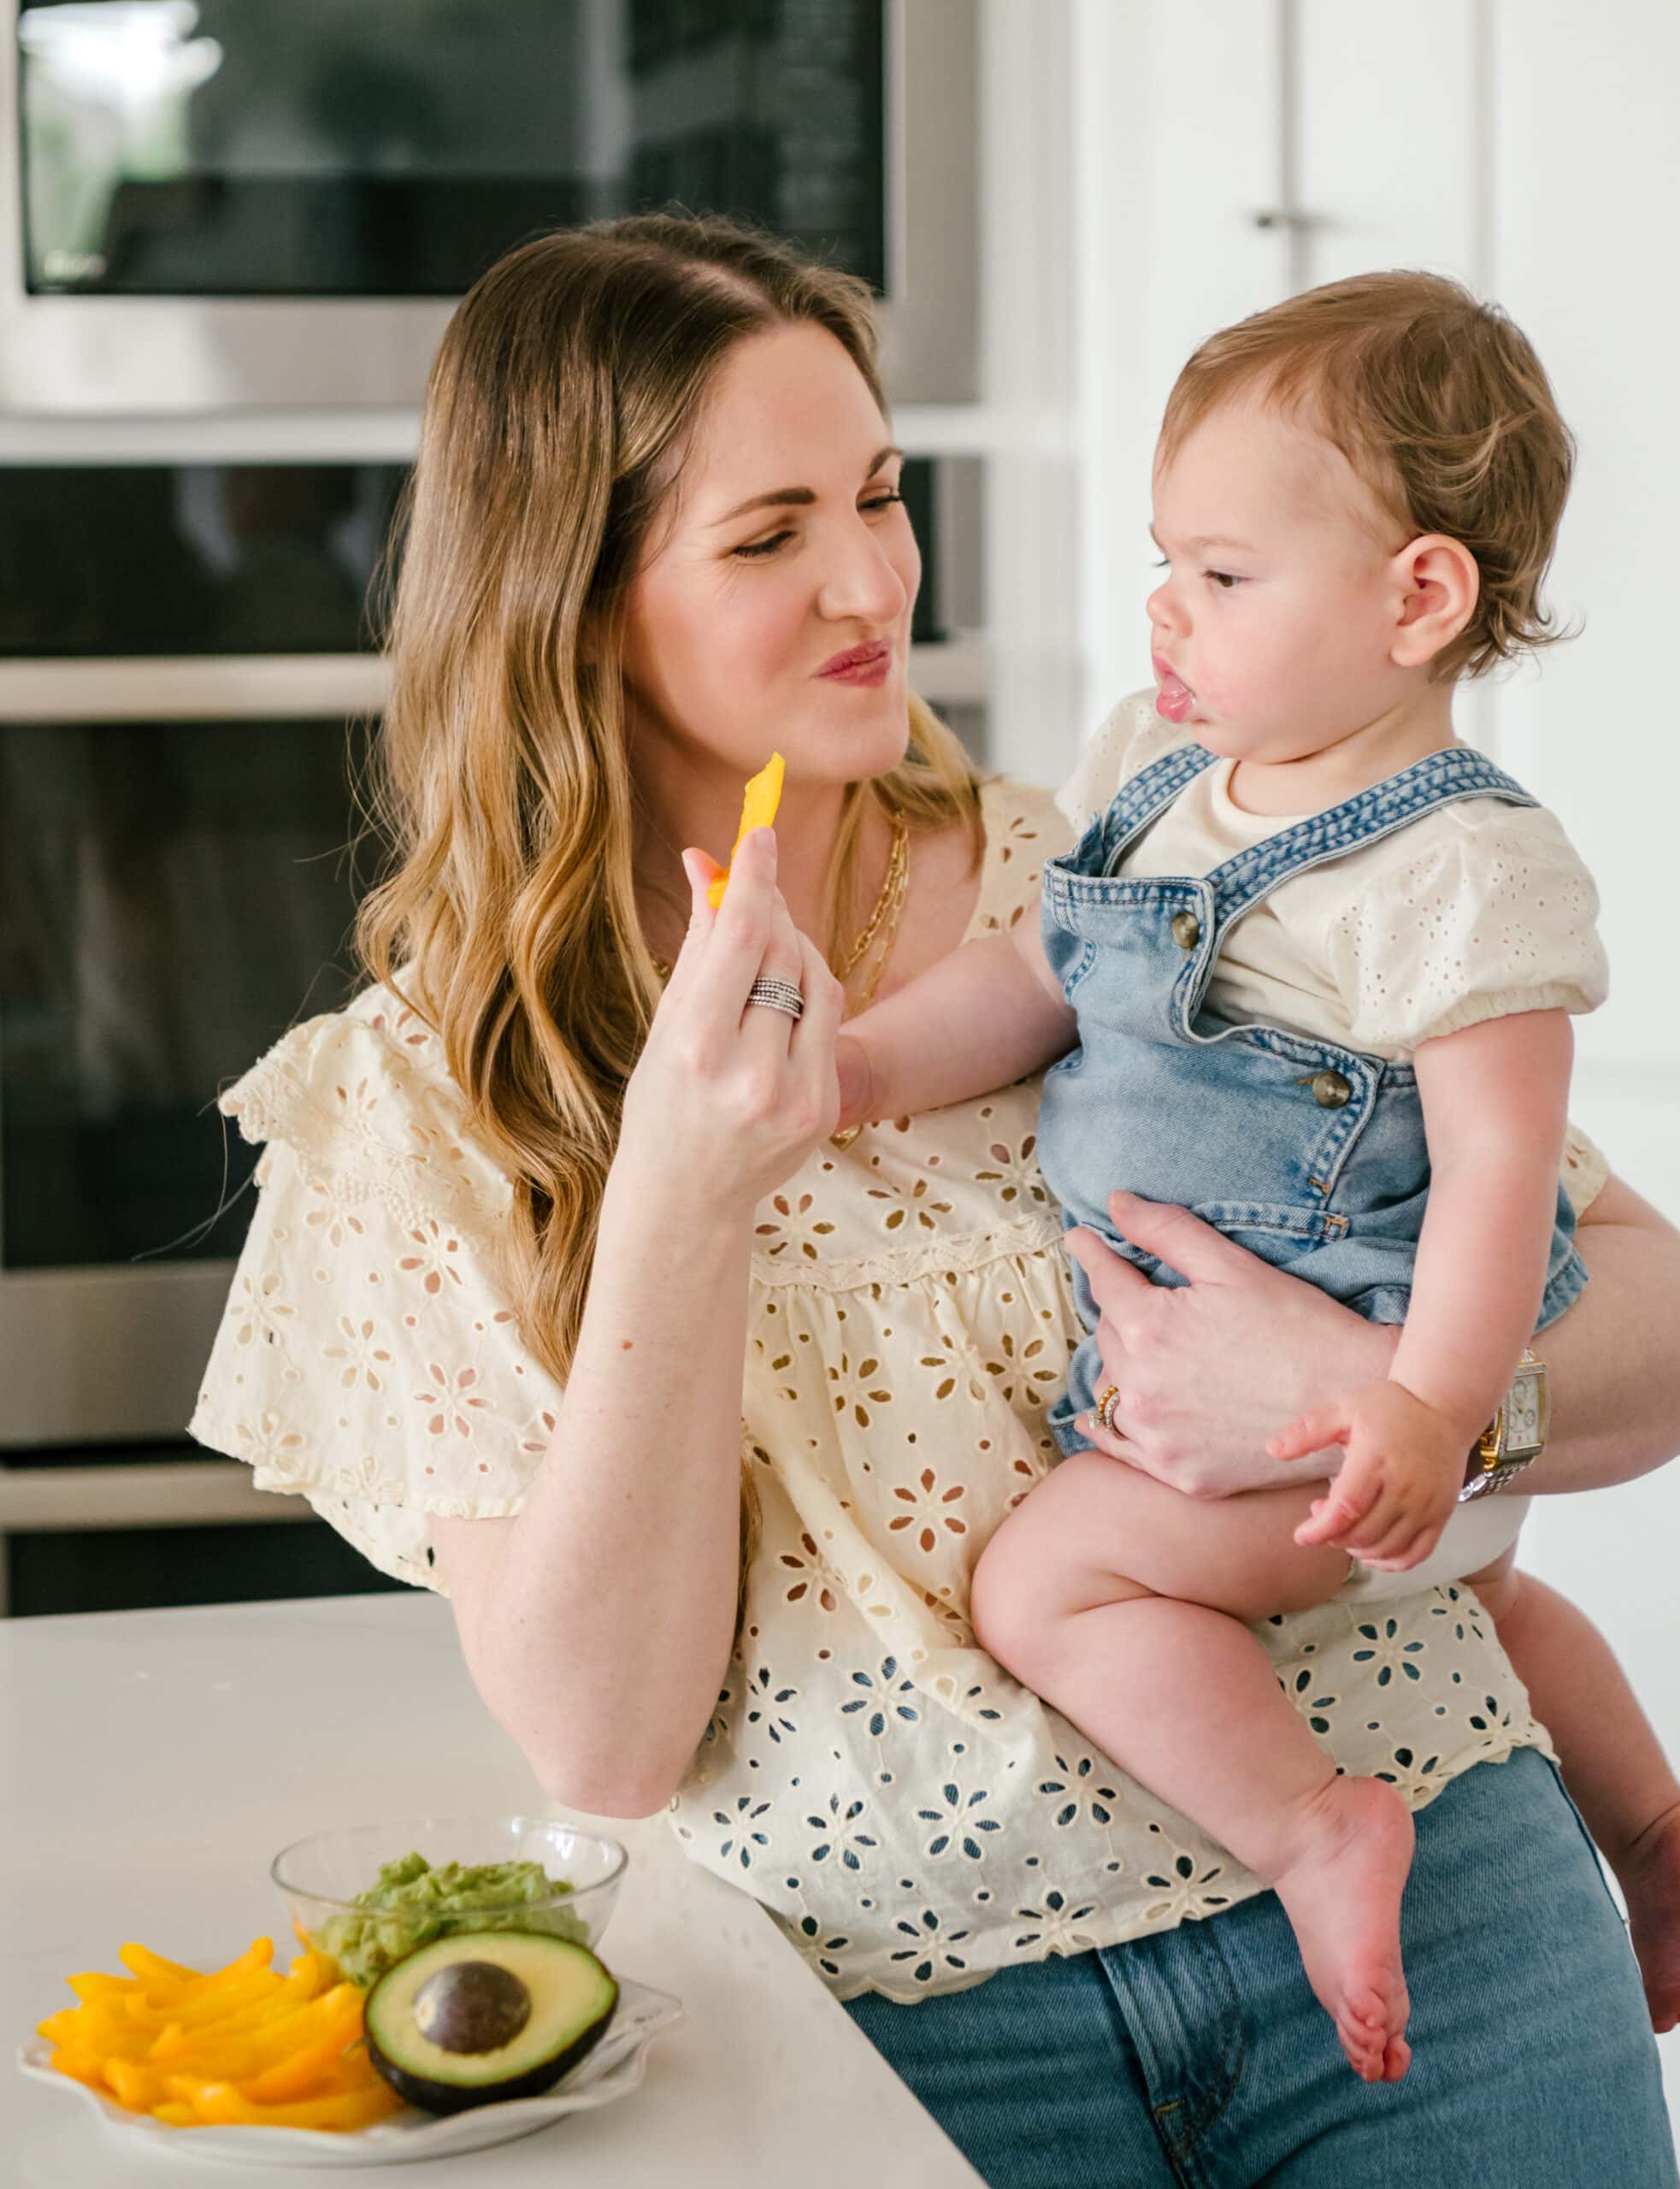 Young mom eating a healthy snack while holding her baby girl